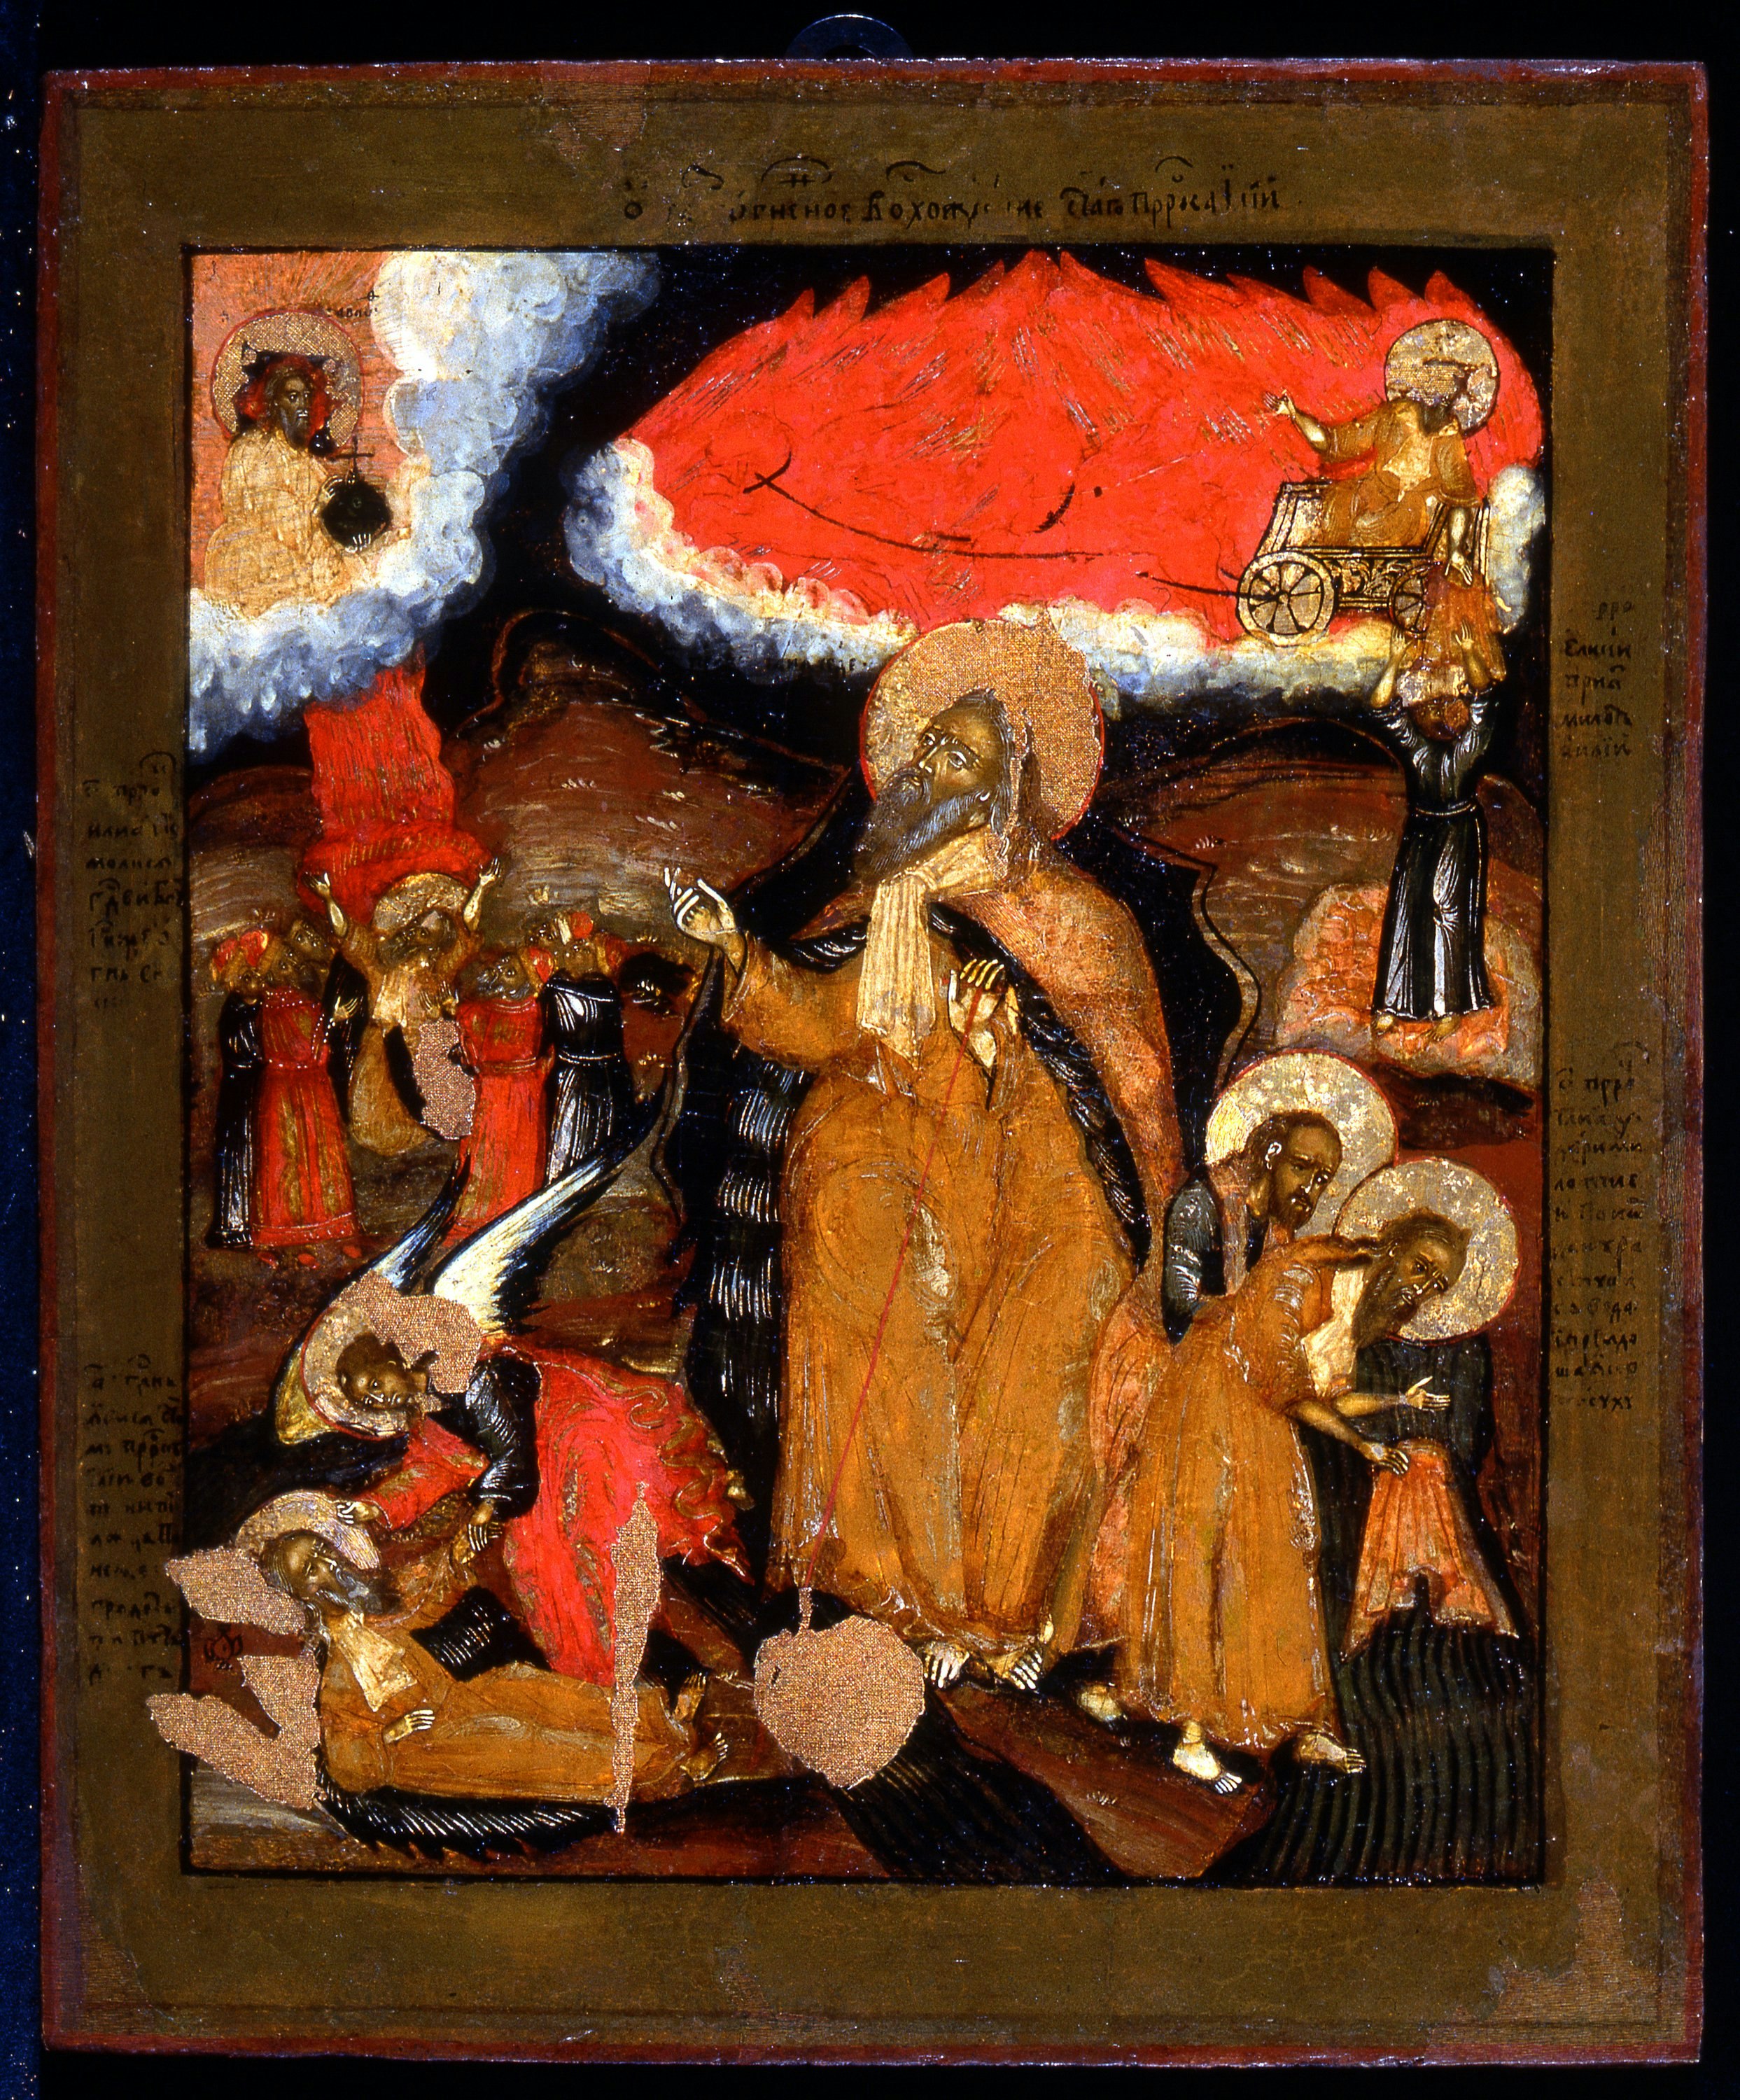 The Prophet Elijah in the Desert, with scenes from the story of his life